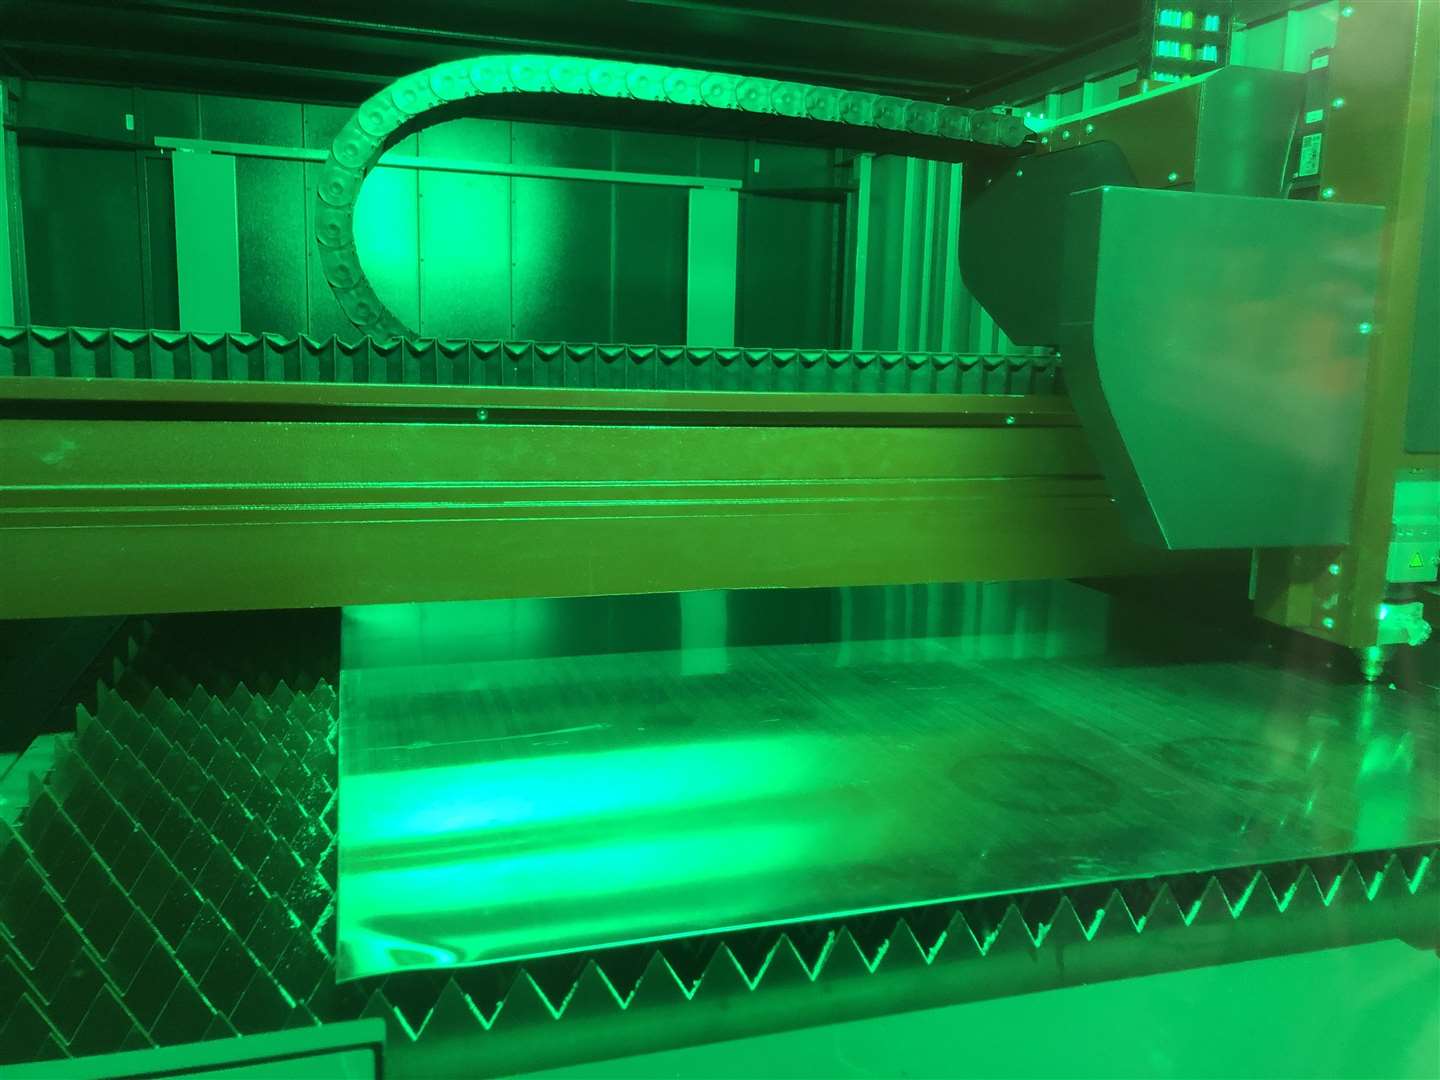 Inside the new laser cutting machine, which is 10 times faster than the previous